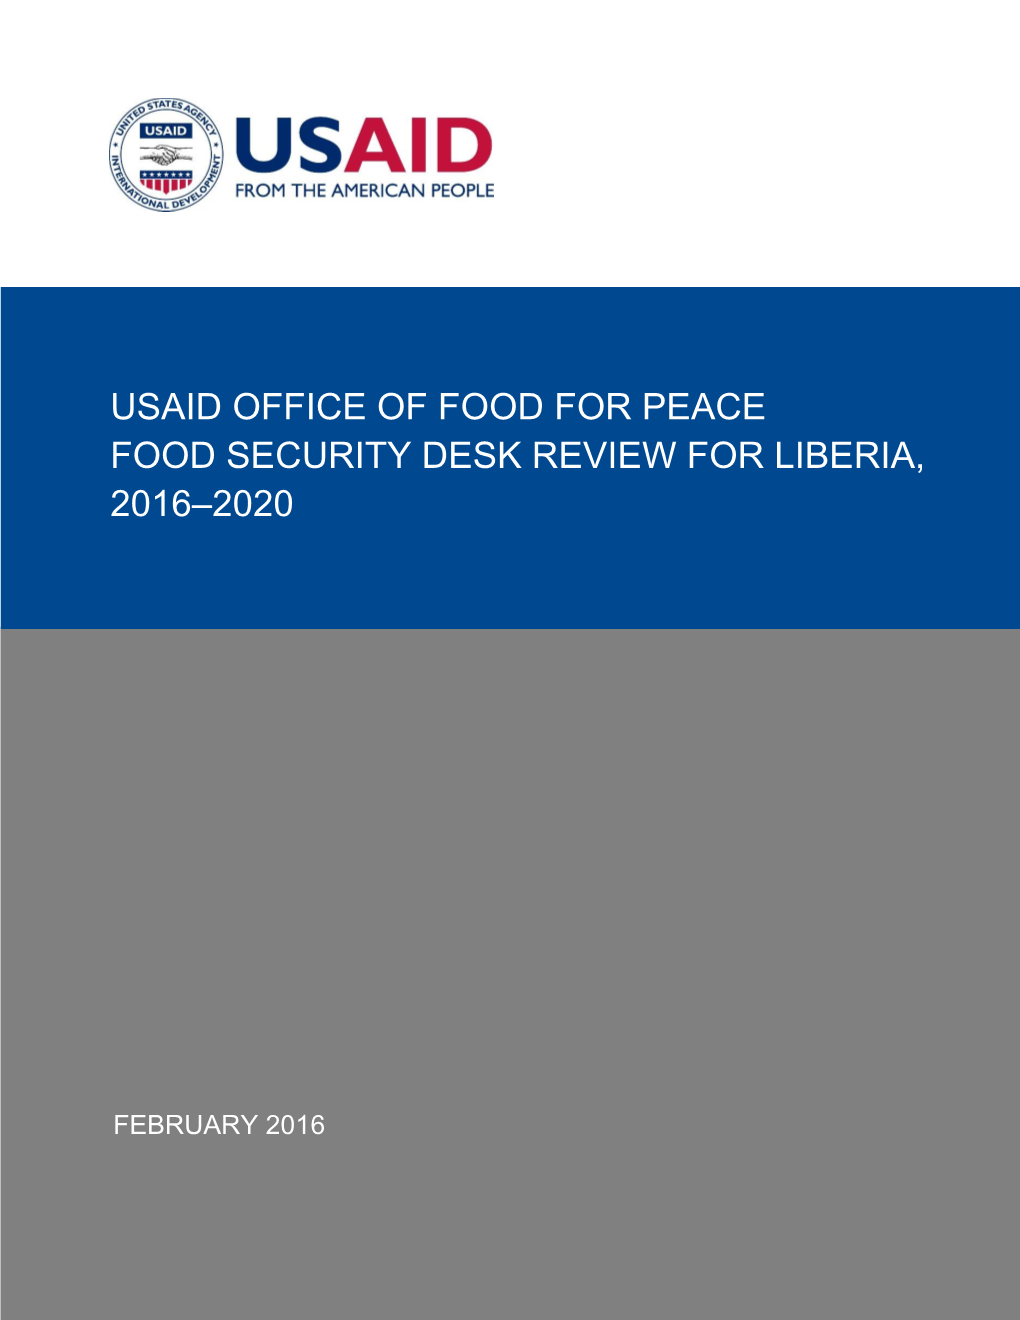 Food Security Desk Review for Liberia, 2016–2020